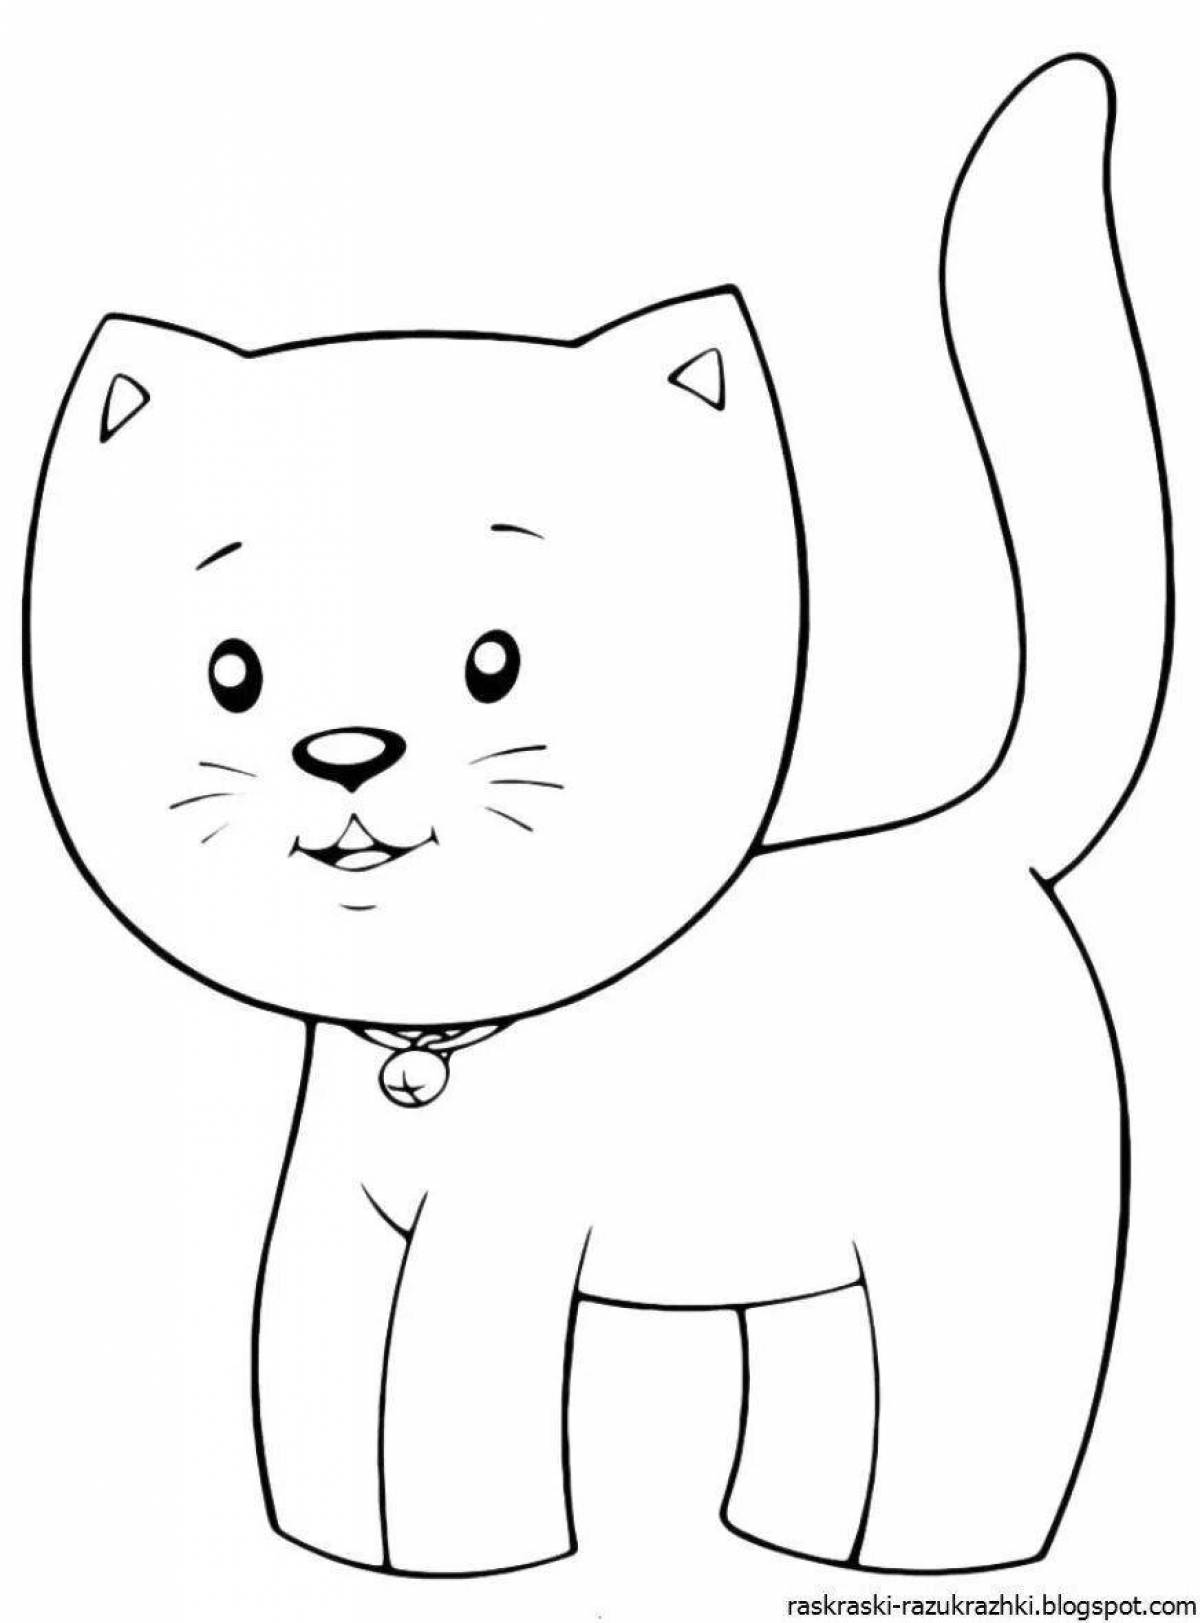 Adorable kitten coloring book for kids 3-4 years old